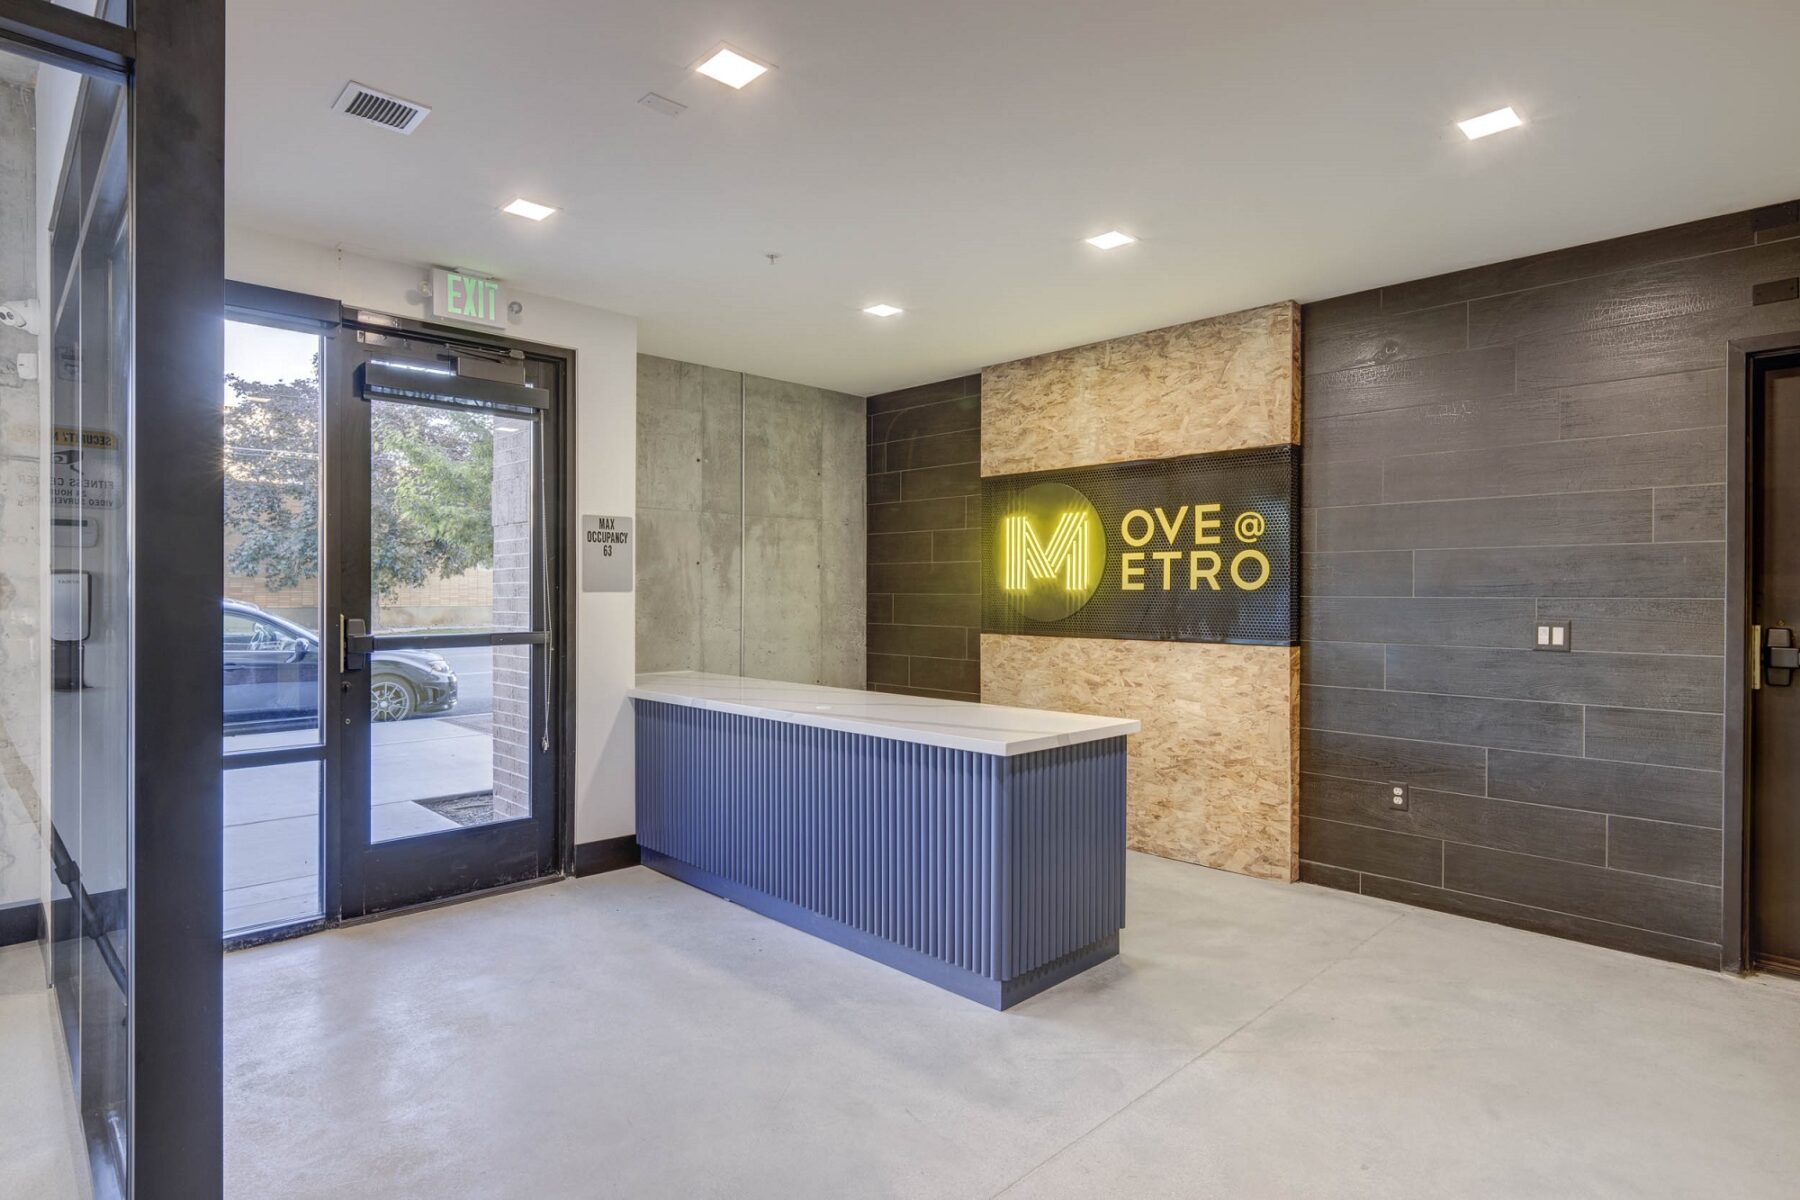 Entrance to clubhouse with Metro Logo Light up sign in yellow on back wall, island countertop in front of sign